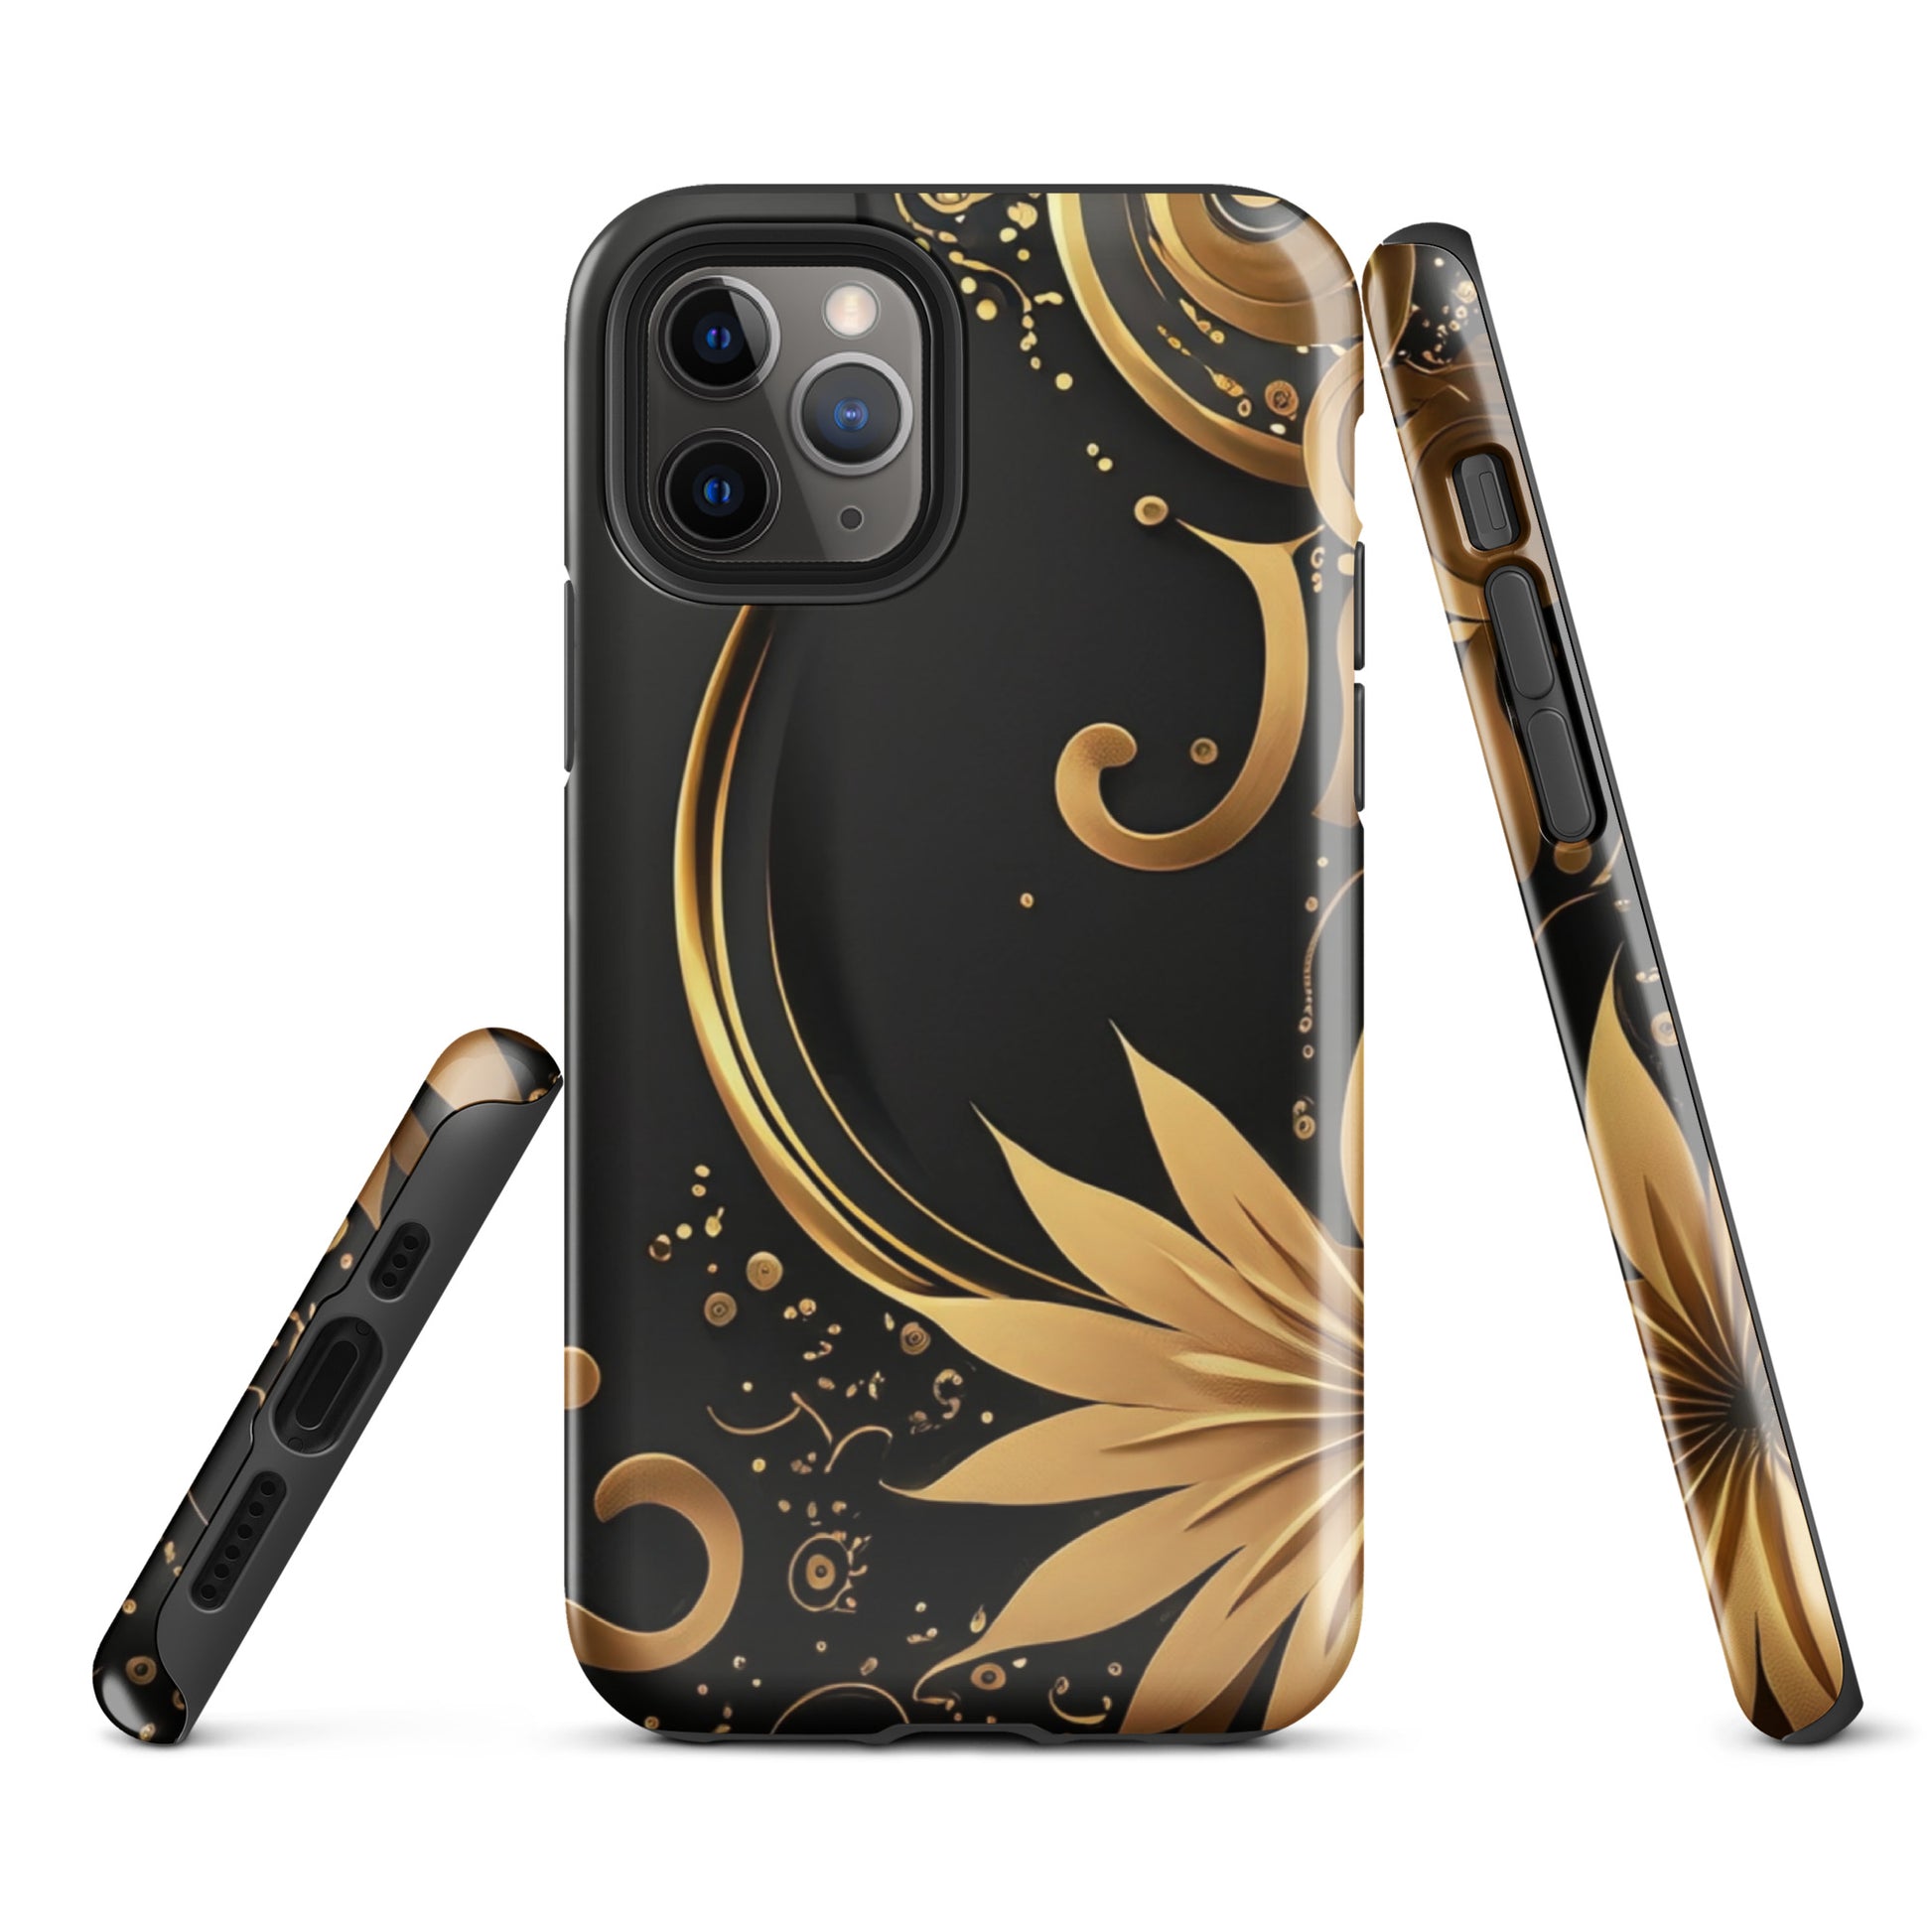 A Golden Flower Case for the iPhone 11 Pro 